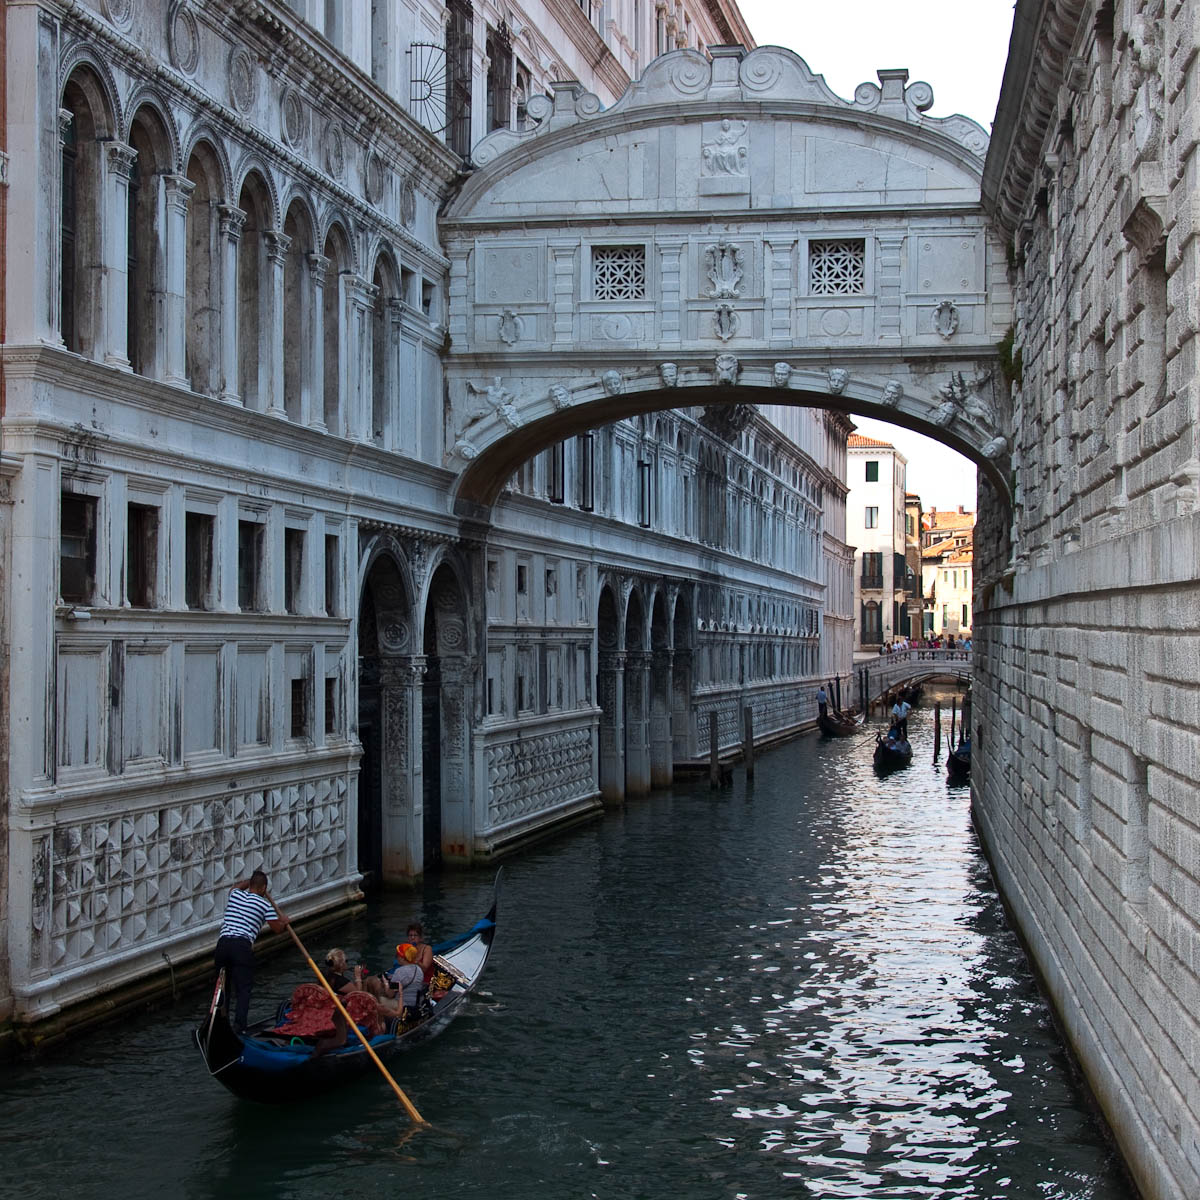 The Bridge of Sighs, Doges' Palace, Venice, Italy - www.rossiwrites.com